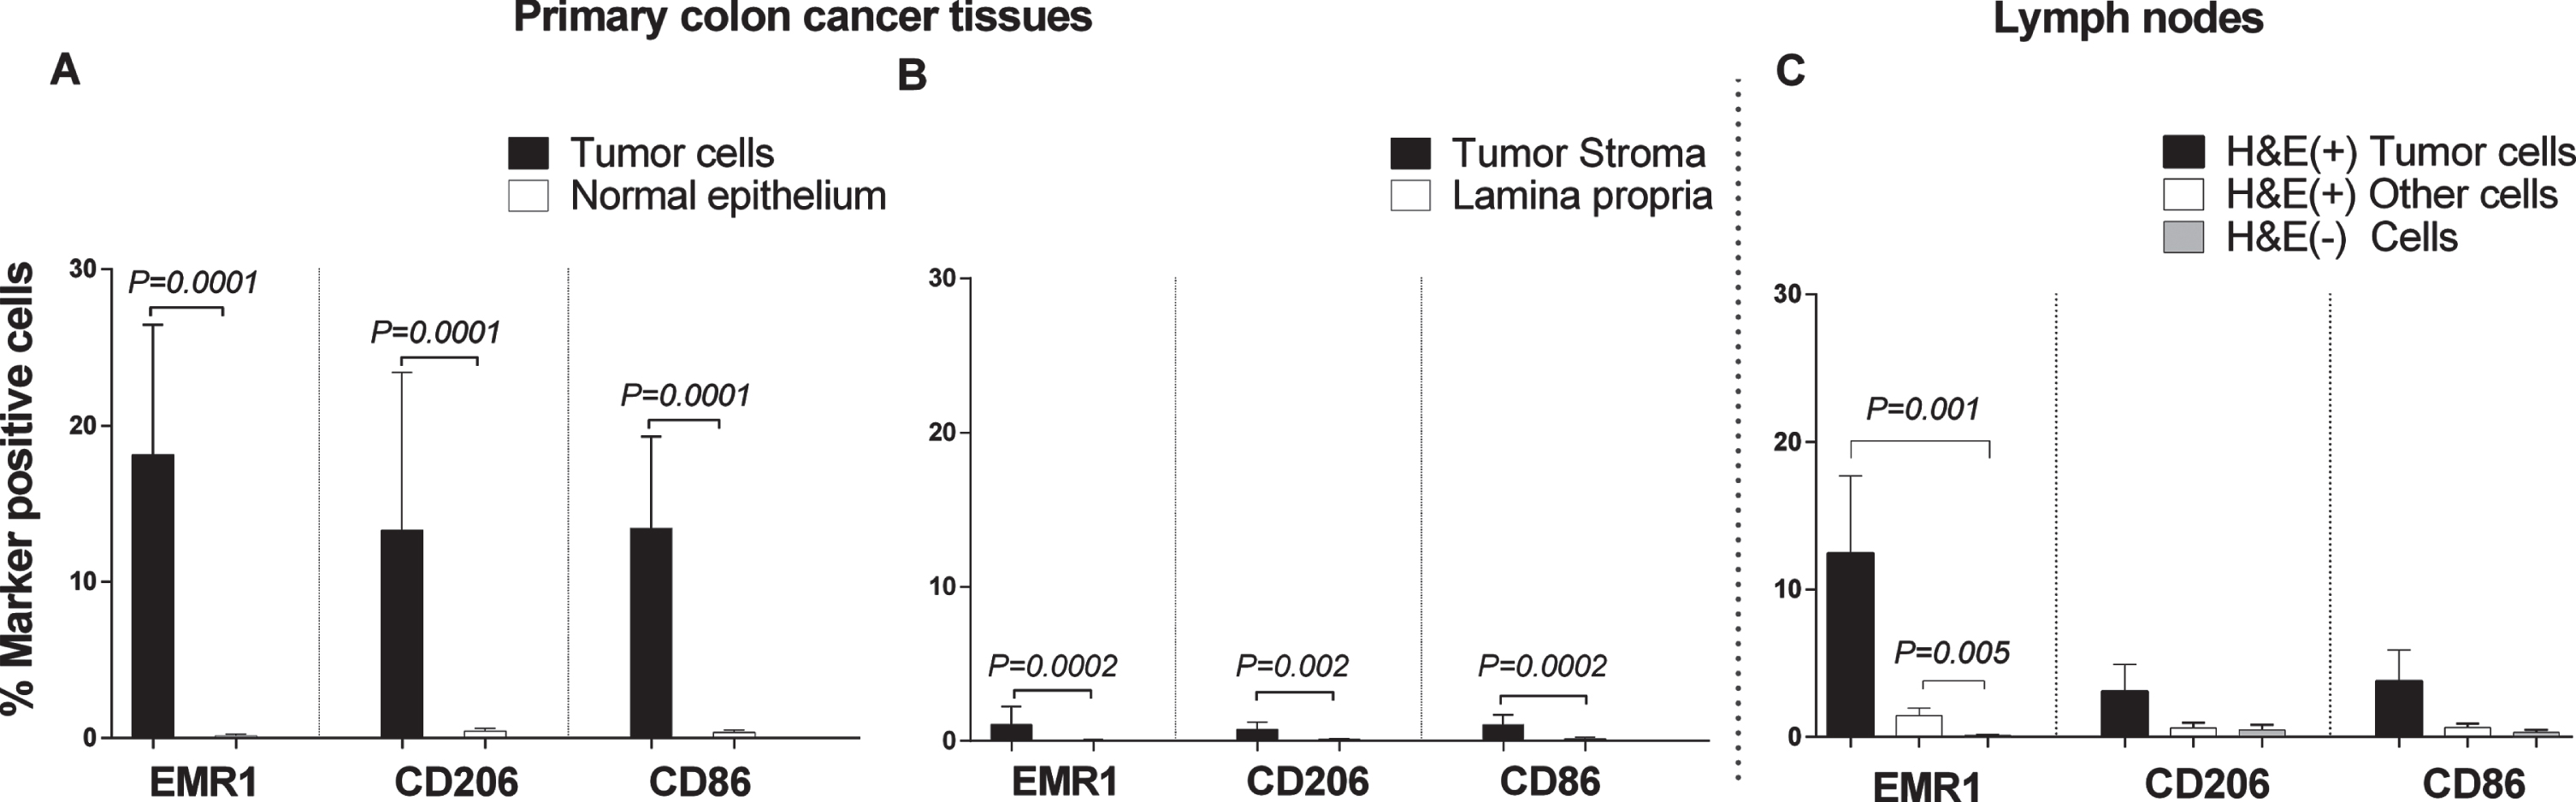 Frequencies of EMR1, CD206 and CD86 positively stained cells in CC primary tumor tissue compared to normal colon tissue, and in H&E(+) and H&E(–) lymph nodes from CC patients as determined by immunomorphometric analysis according to Weibel. (A) CC tumor cells (black bars) compared with normal epithelial cells (open bars). (B) CC tumor stroma (black bars) compared with lamina propria in normal colon (open bars). (C) Metastatic tumors cells (black bars) and other cells of H&E(+) lymph nodes (open bars) compared to cells of H&E(–) lymph nodes (grey bars). Bars represent mean+1 SEM. P-values for comparisons between tumor and normal tissue by two-sided Mann–Whitney t-test are given. Ten primary CC tumors and 9 normal colon tissue samples were analyzed in A and B. Thirteen lymph nodes were analyzed in C.